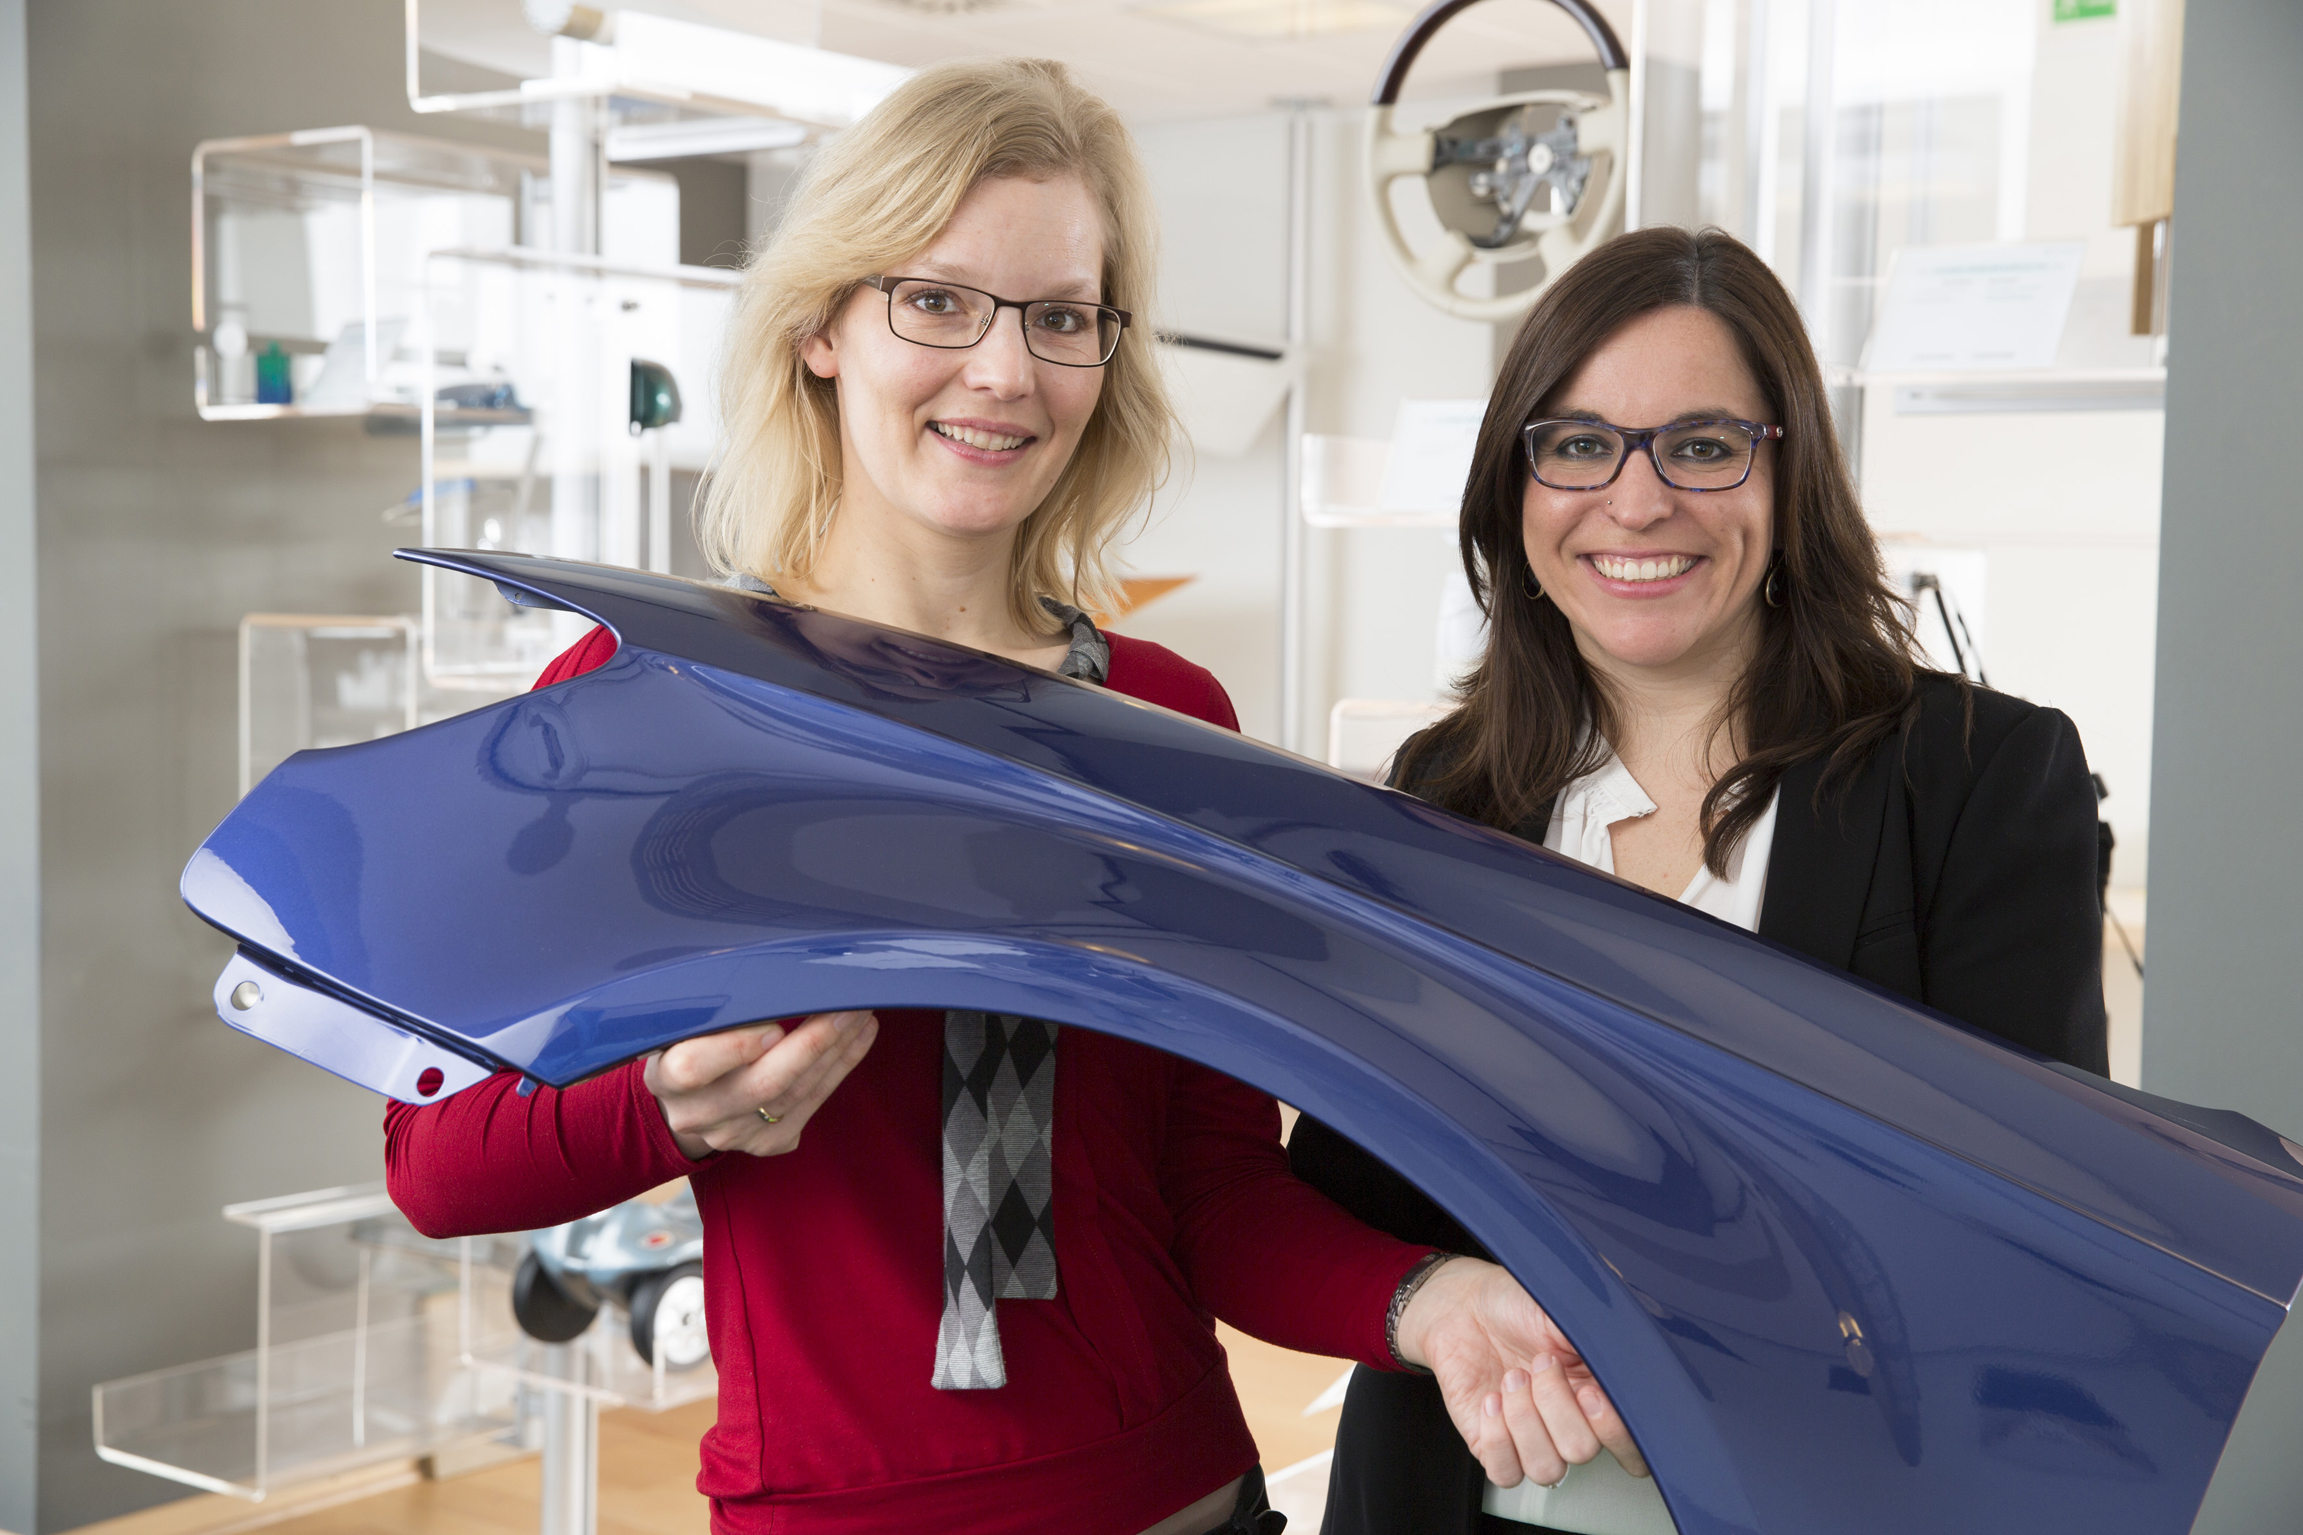 Dr. Gesa Behnken (left), global head of new technologies, and Dr. Berta Vega Sánchez, marketing manager in the coatings, adhesives, specialties business unit of Bayer MaterialScience, present a coated car body part.